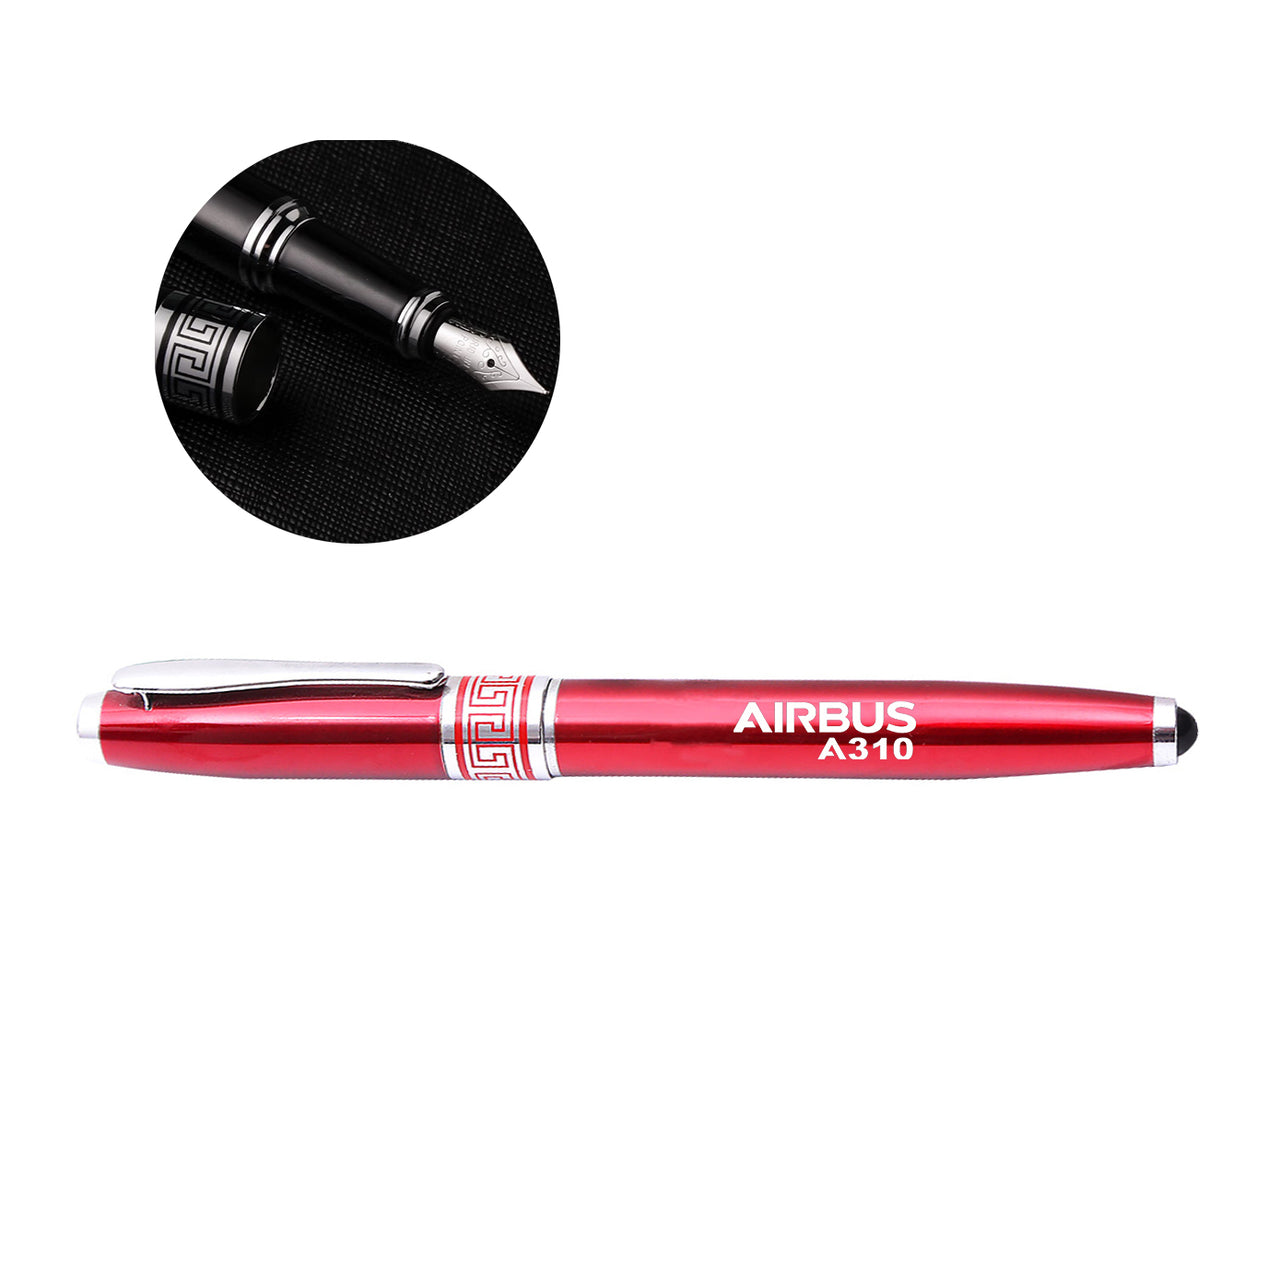 Airbus A310 & Text Designed Pens